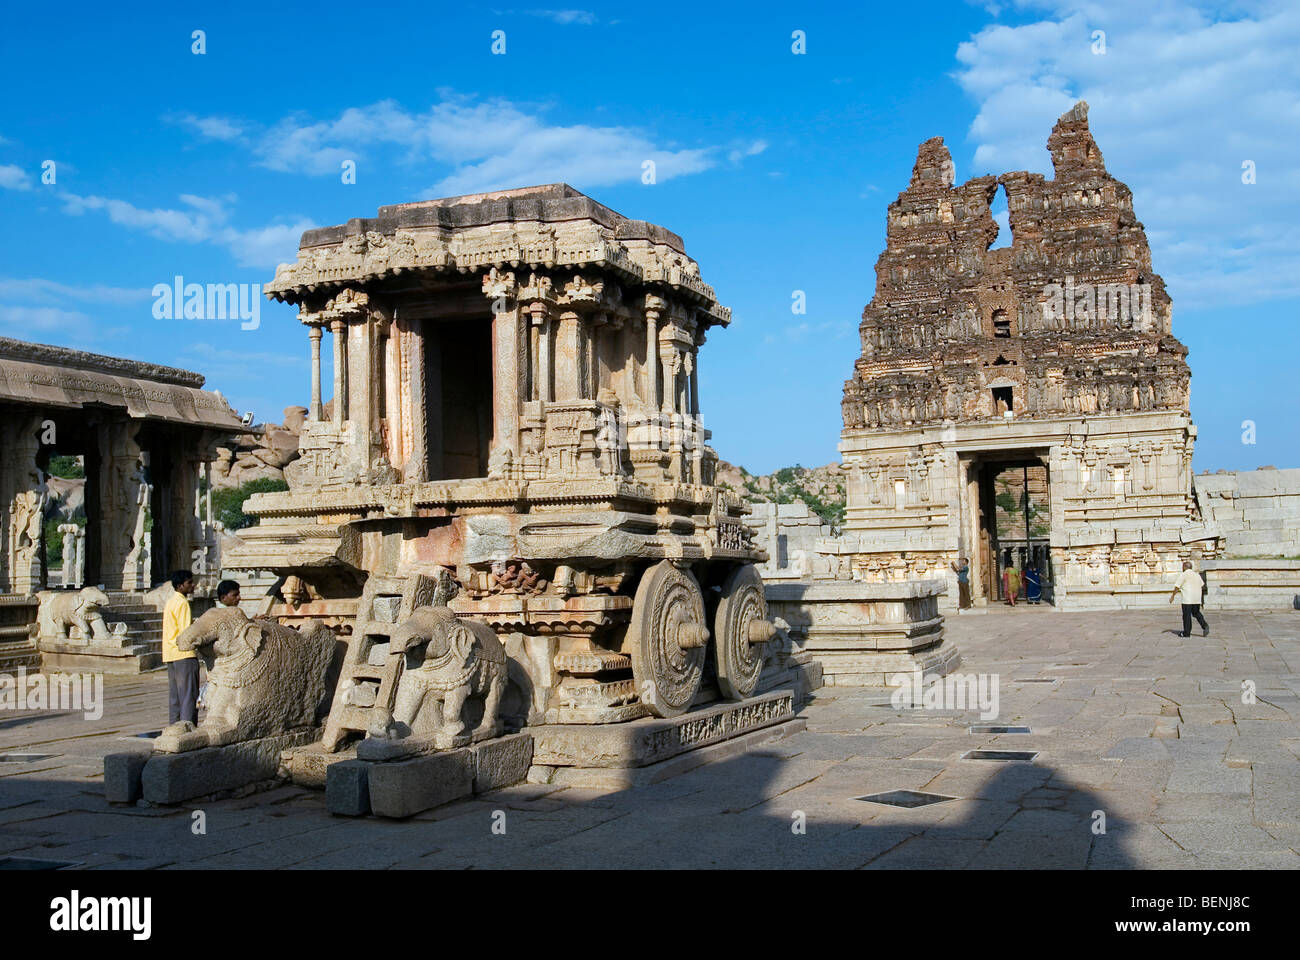 The Stone chariot in Vitthala Temple built in the 15th century A.D. during the reign of King Krishna Deva Raya Hampi Kartanaka Stock Photo